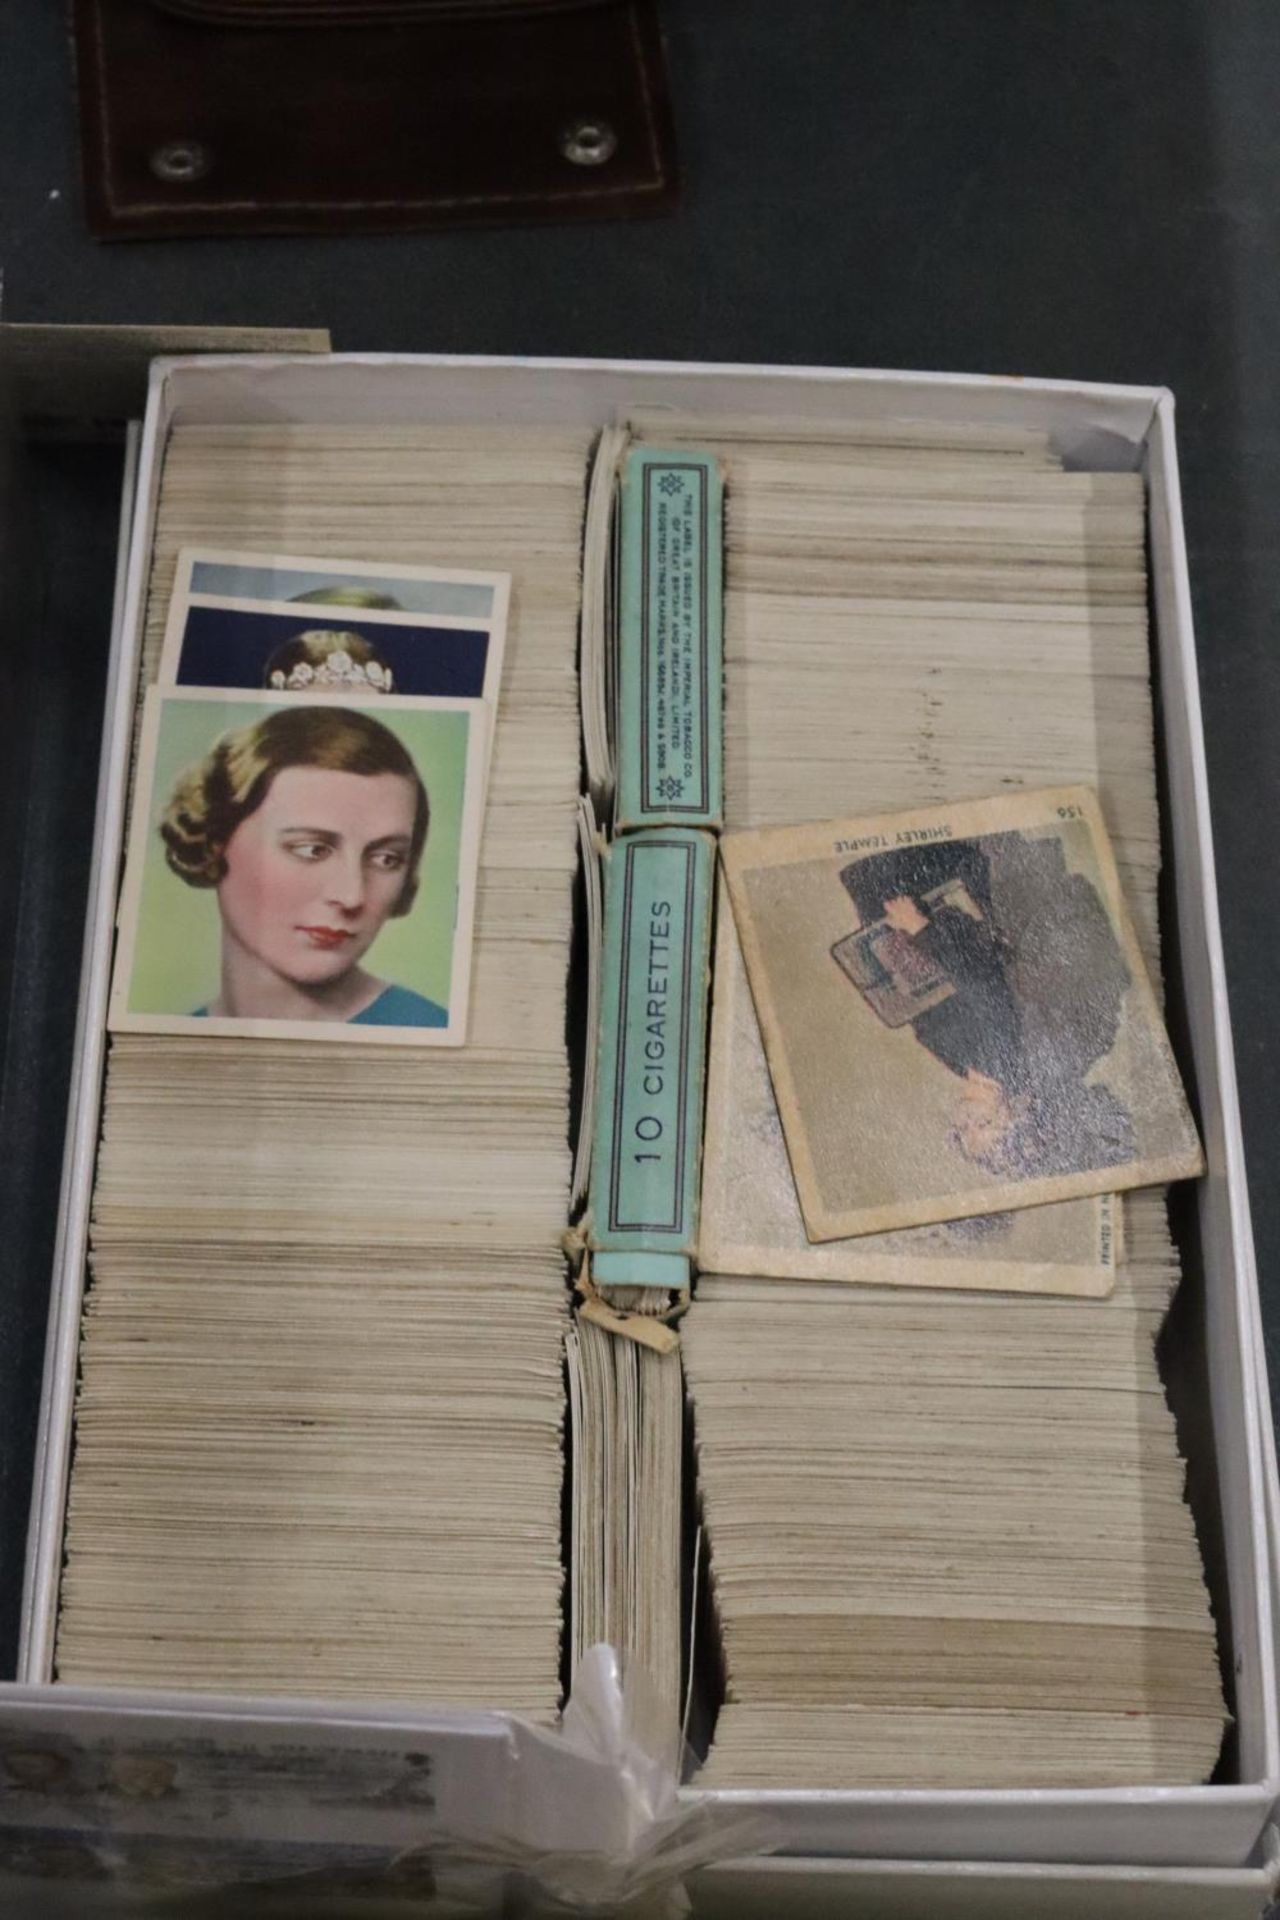 A LARGE QUANTITY OF LOOSE CIGARETTE CARDS TOGETHER WITH A VINTAGE ALBUM - Image 10 of 10